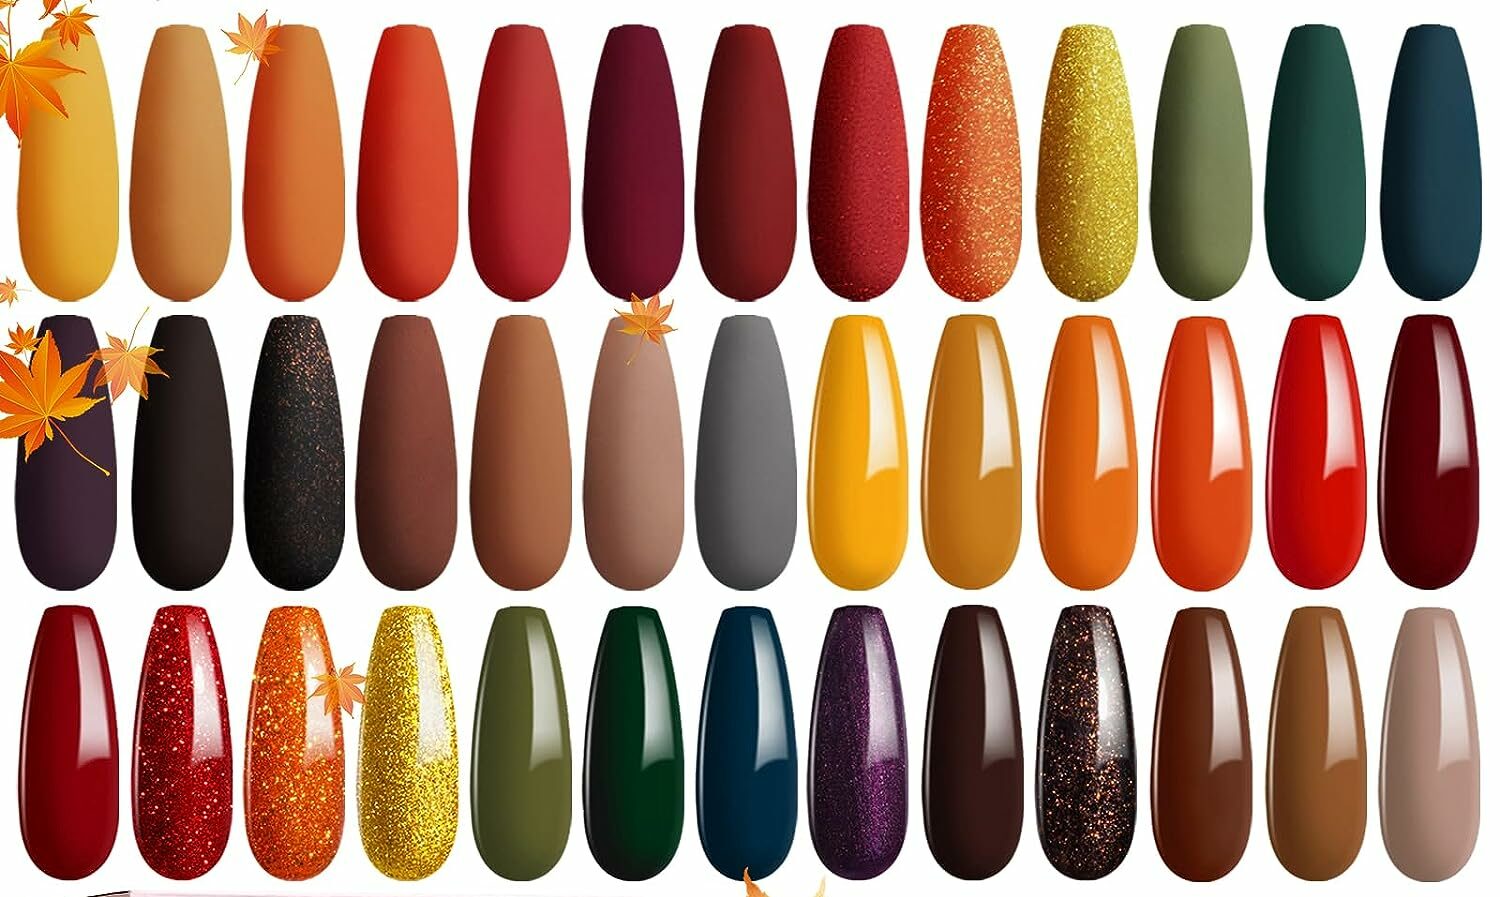 3. "Tropical Vibes: Must-Have Nail Colors for a Fun Summer Look in 2024" - wide 8